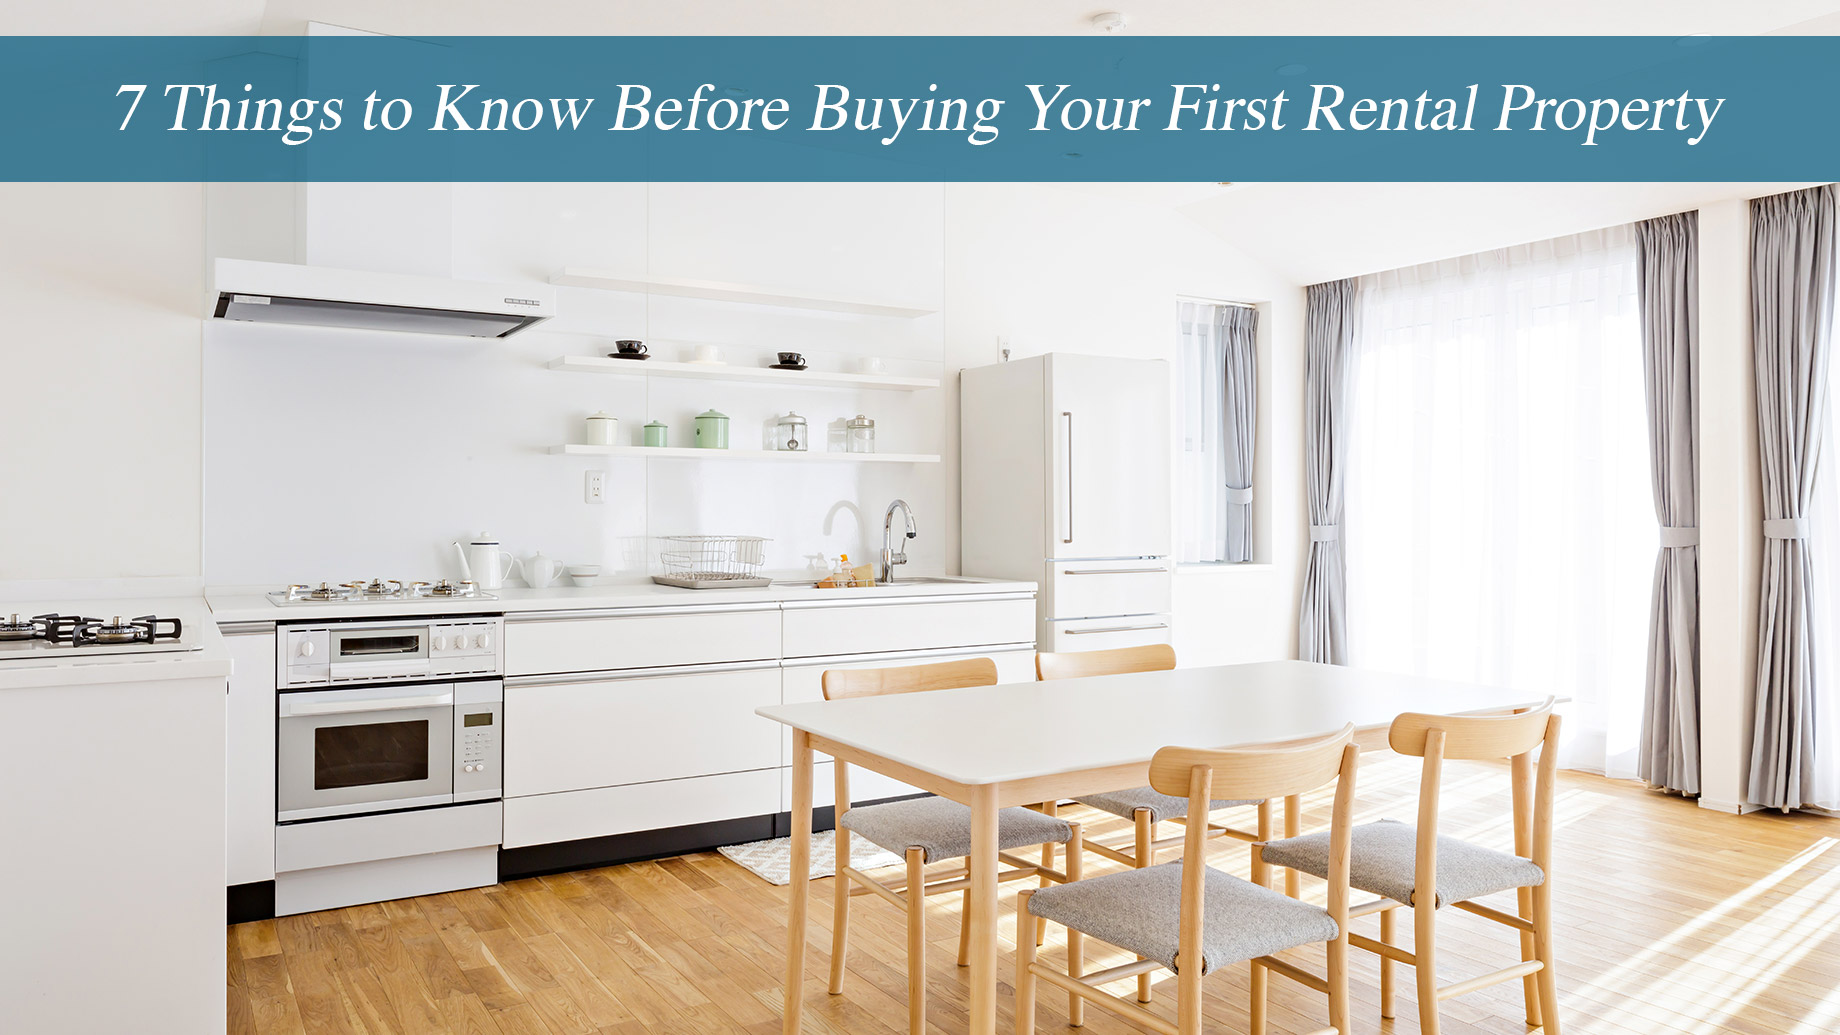 7 Things to Know Before Buying Your First Rental Property